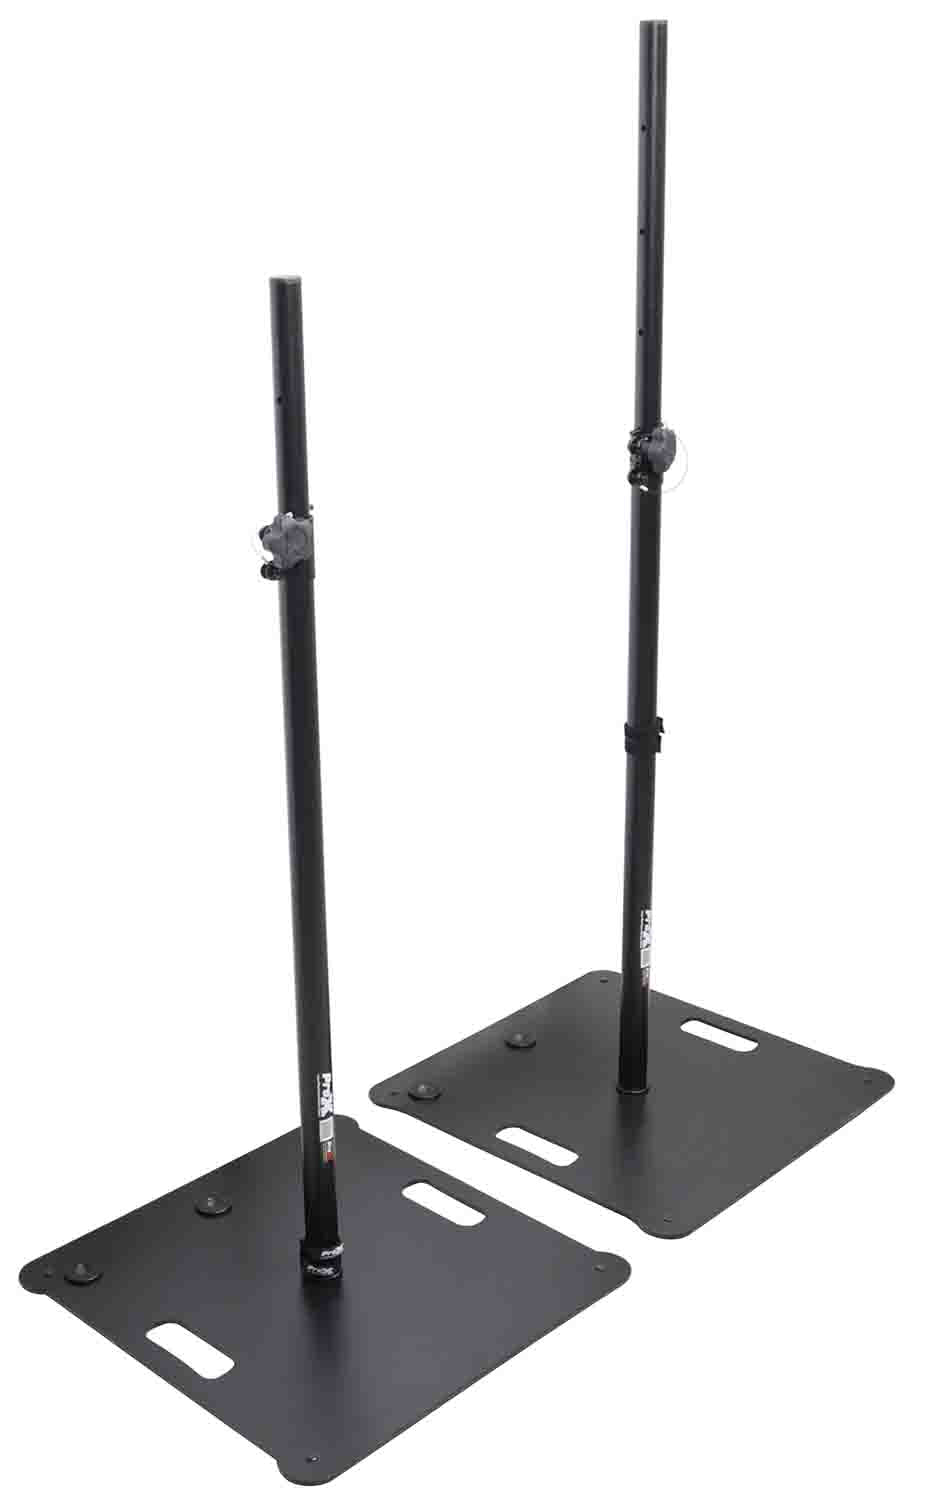 B-Stock: ProX X-POLARIS BL X2 Portable Speaker and Lighting Dual Stand Kit with Base Plate and Carry Bags - Black Finish by ProX Cases